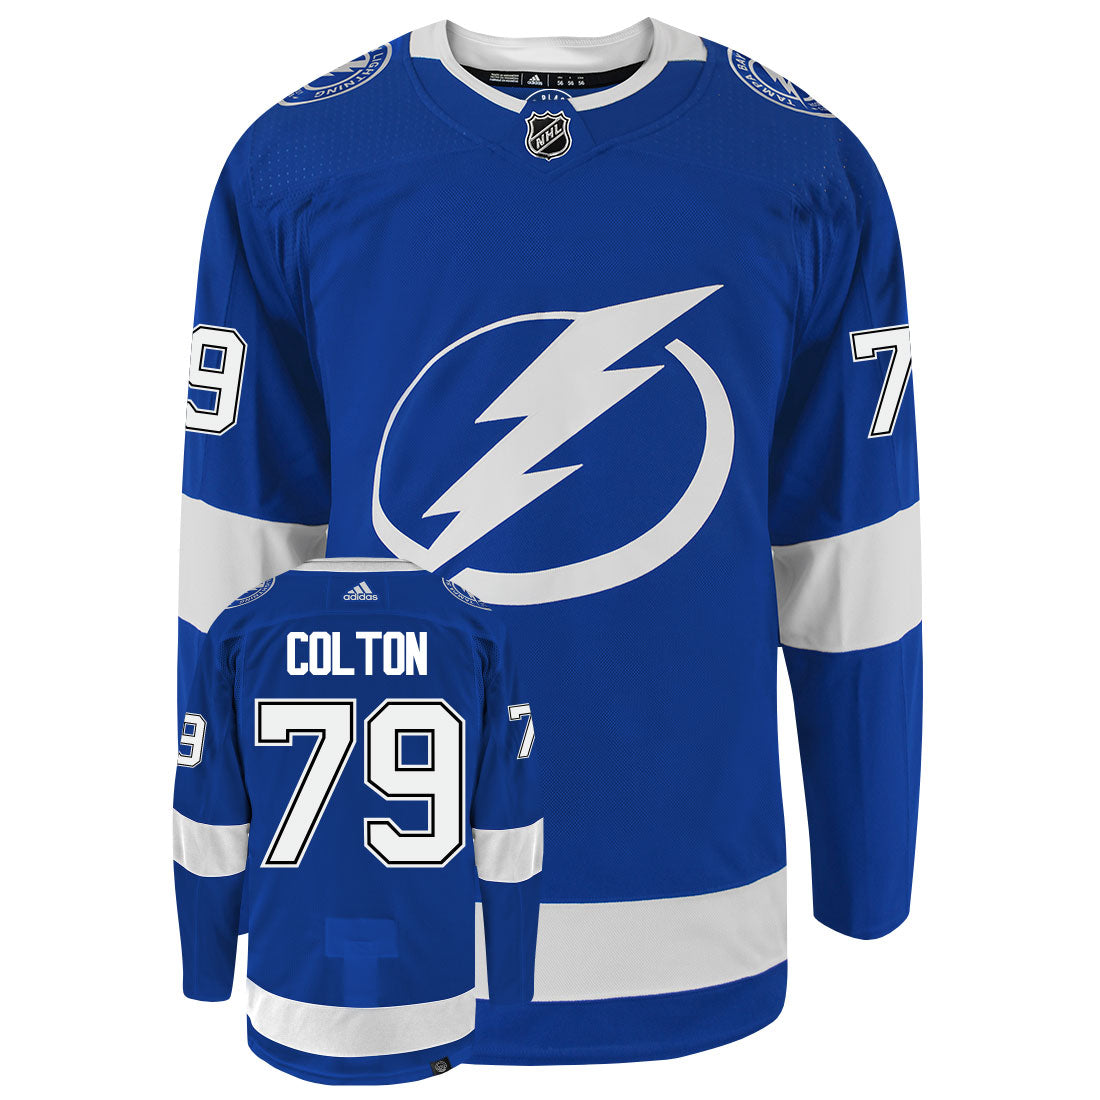 Ross Colton Tampa Bay Lightning Adidas Primegreen Authentic NHL Hockey Jersey - Front/Back View